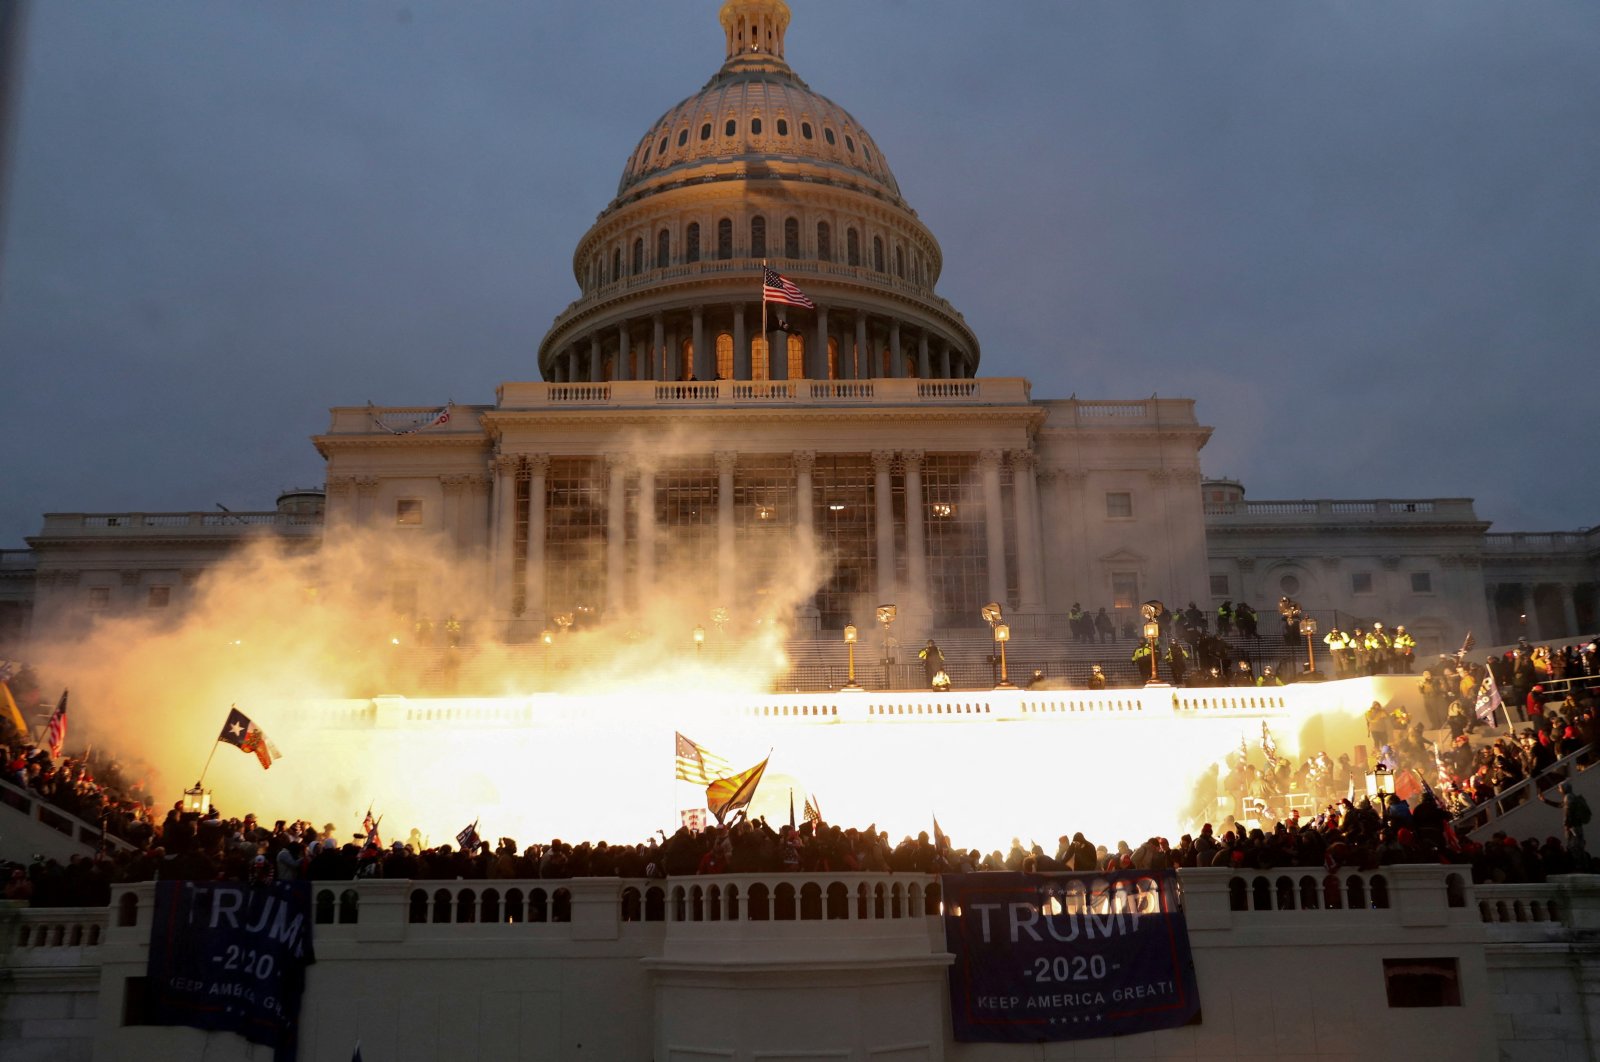 An explosion caused by police munition is seen while supporters of then U.S. President Donald Trump gather in front of the U.S. Capitol Building in Washington, D.C., U.S., Jan. 6, 2021. (Reuters Photo)